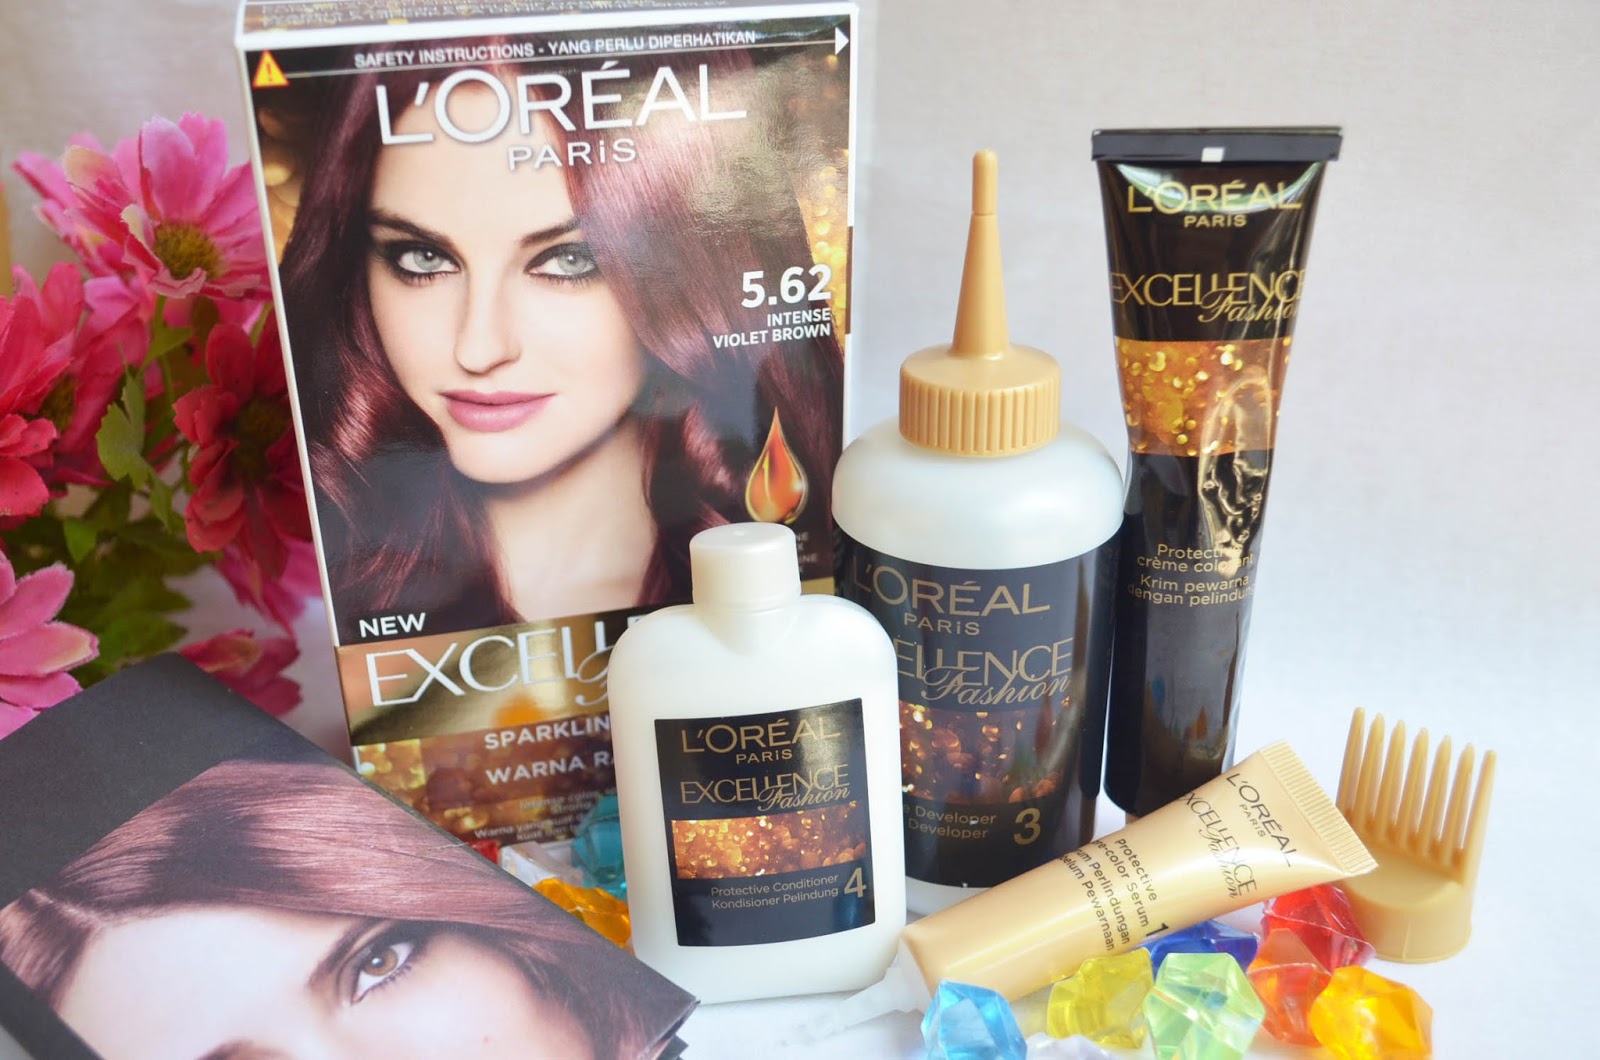 CAT RAMBUT : LOREAL EXCELLENCE FASHION VIOLET BROWN 5.62 REVIEW